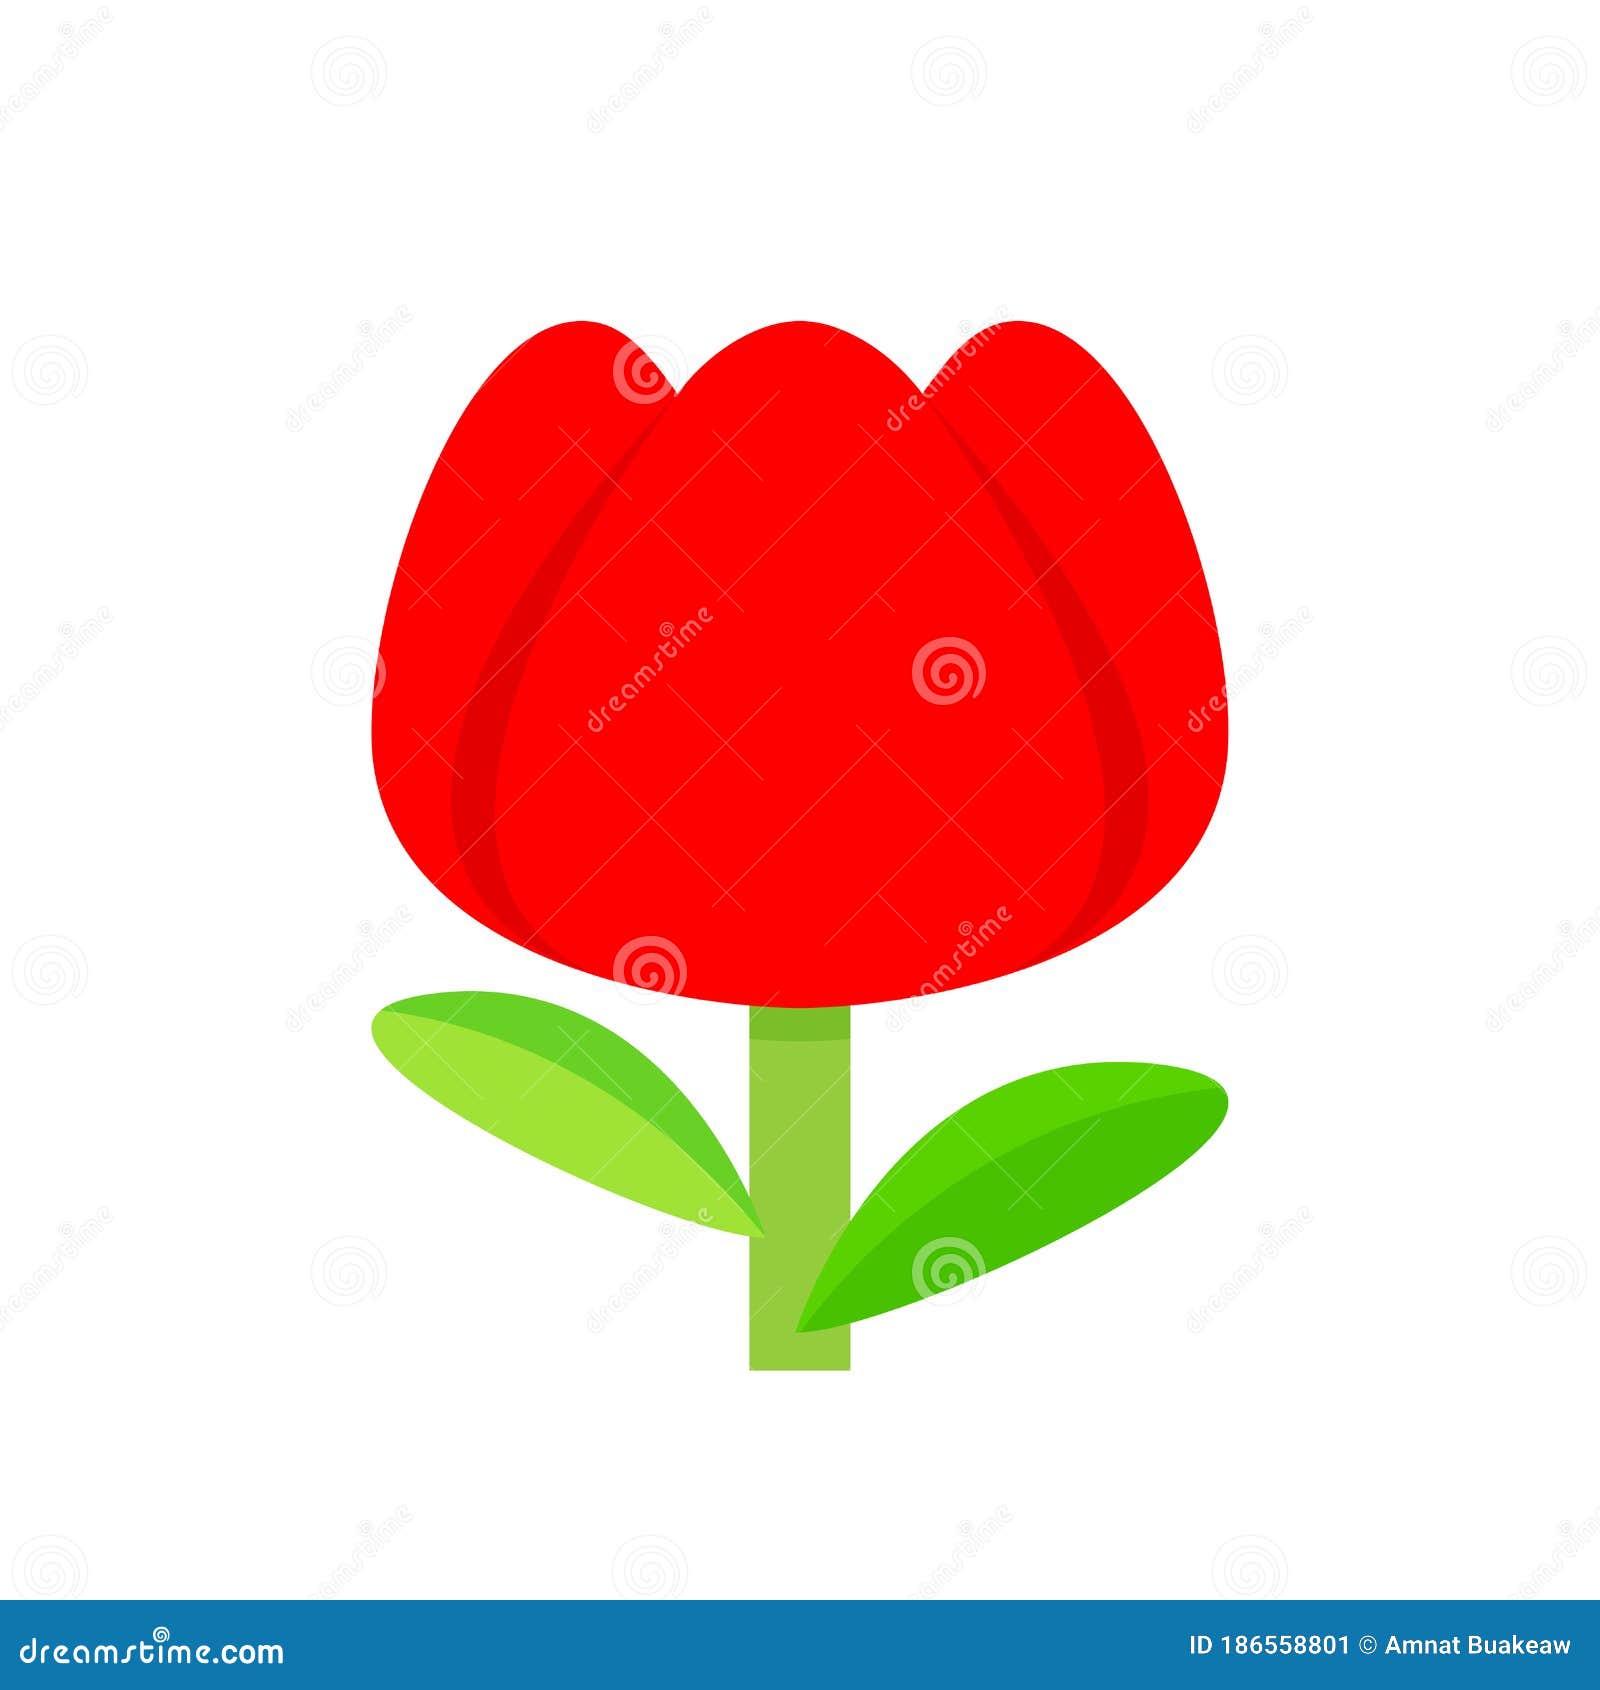 Tulip Flower Red Simple Isolated on White Background, Tulips Red Cartoon  for Clip Art, Illustration Tulip Flower Stock Vector - Illustration of  bloom, flores: 186558801